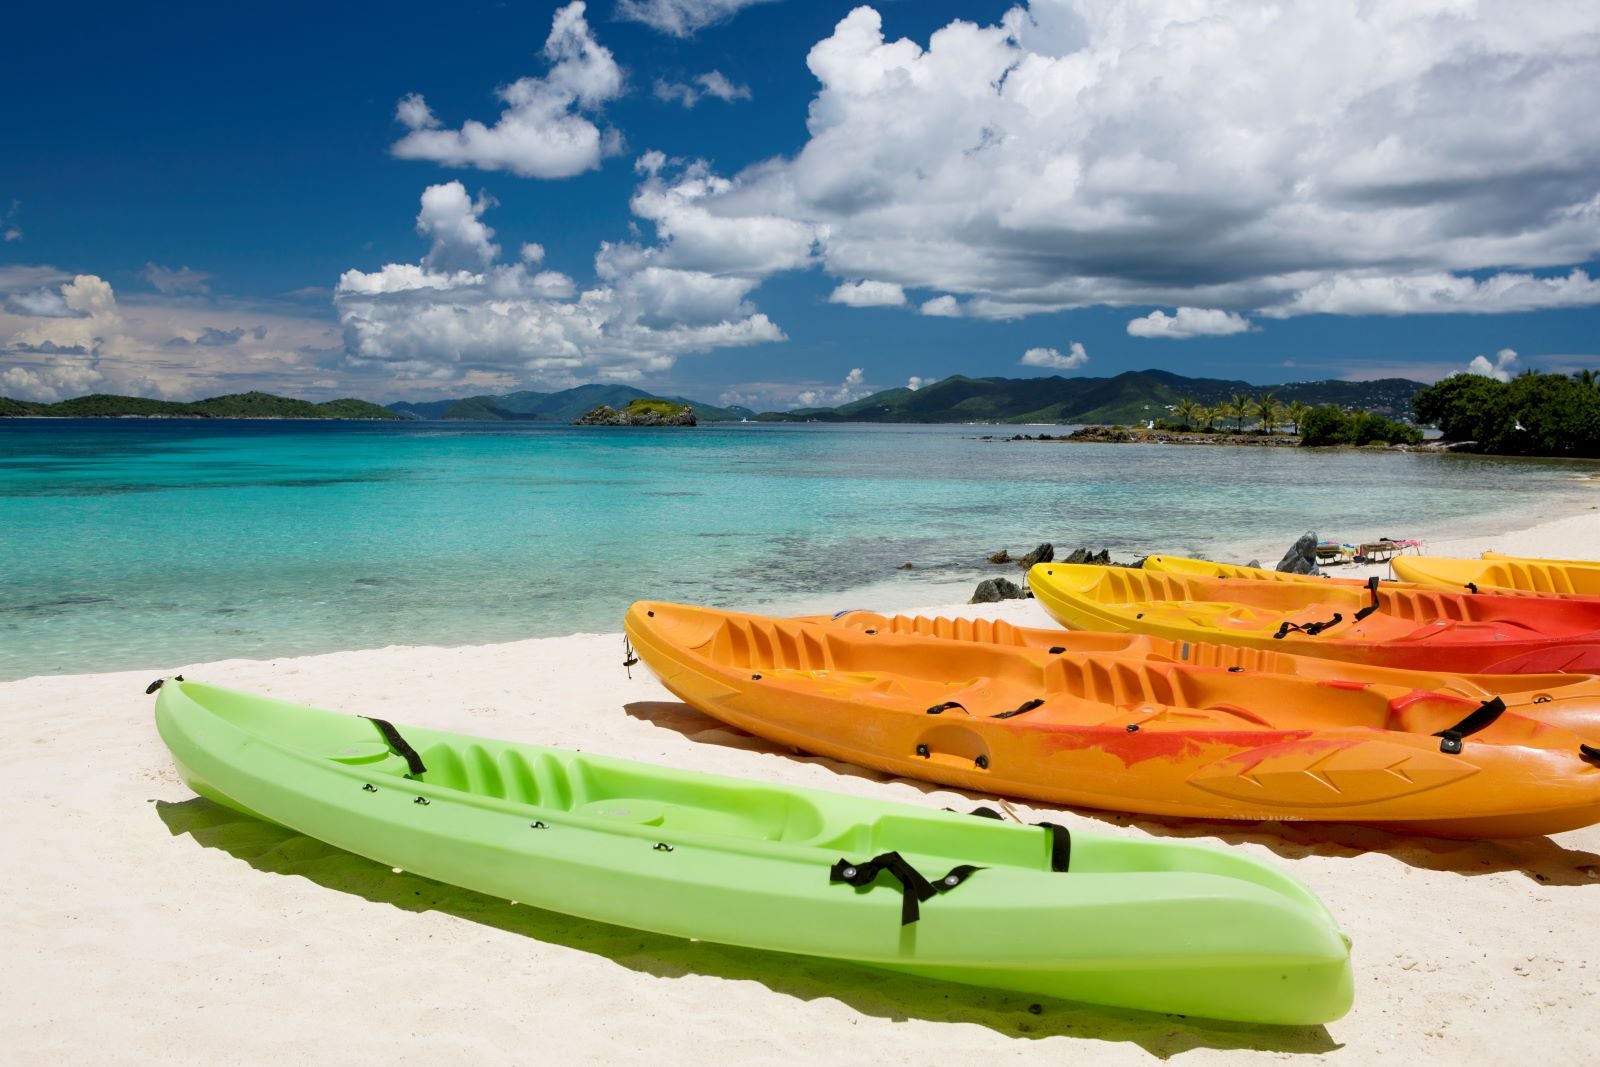 STT CanoeGettyImages cdwheatley Copy - Travel News, Insights & Resources.